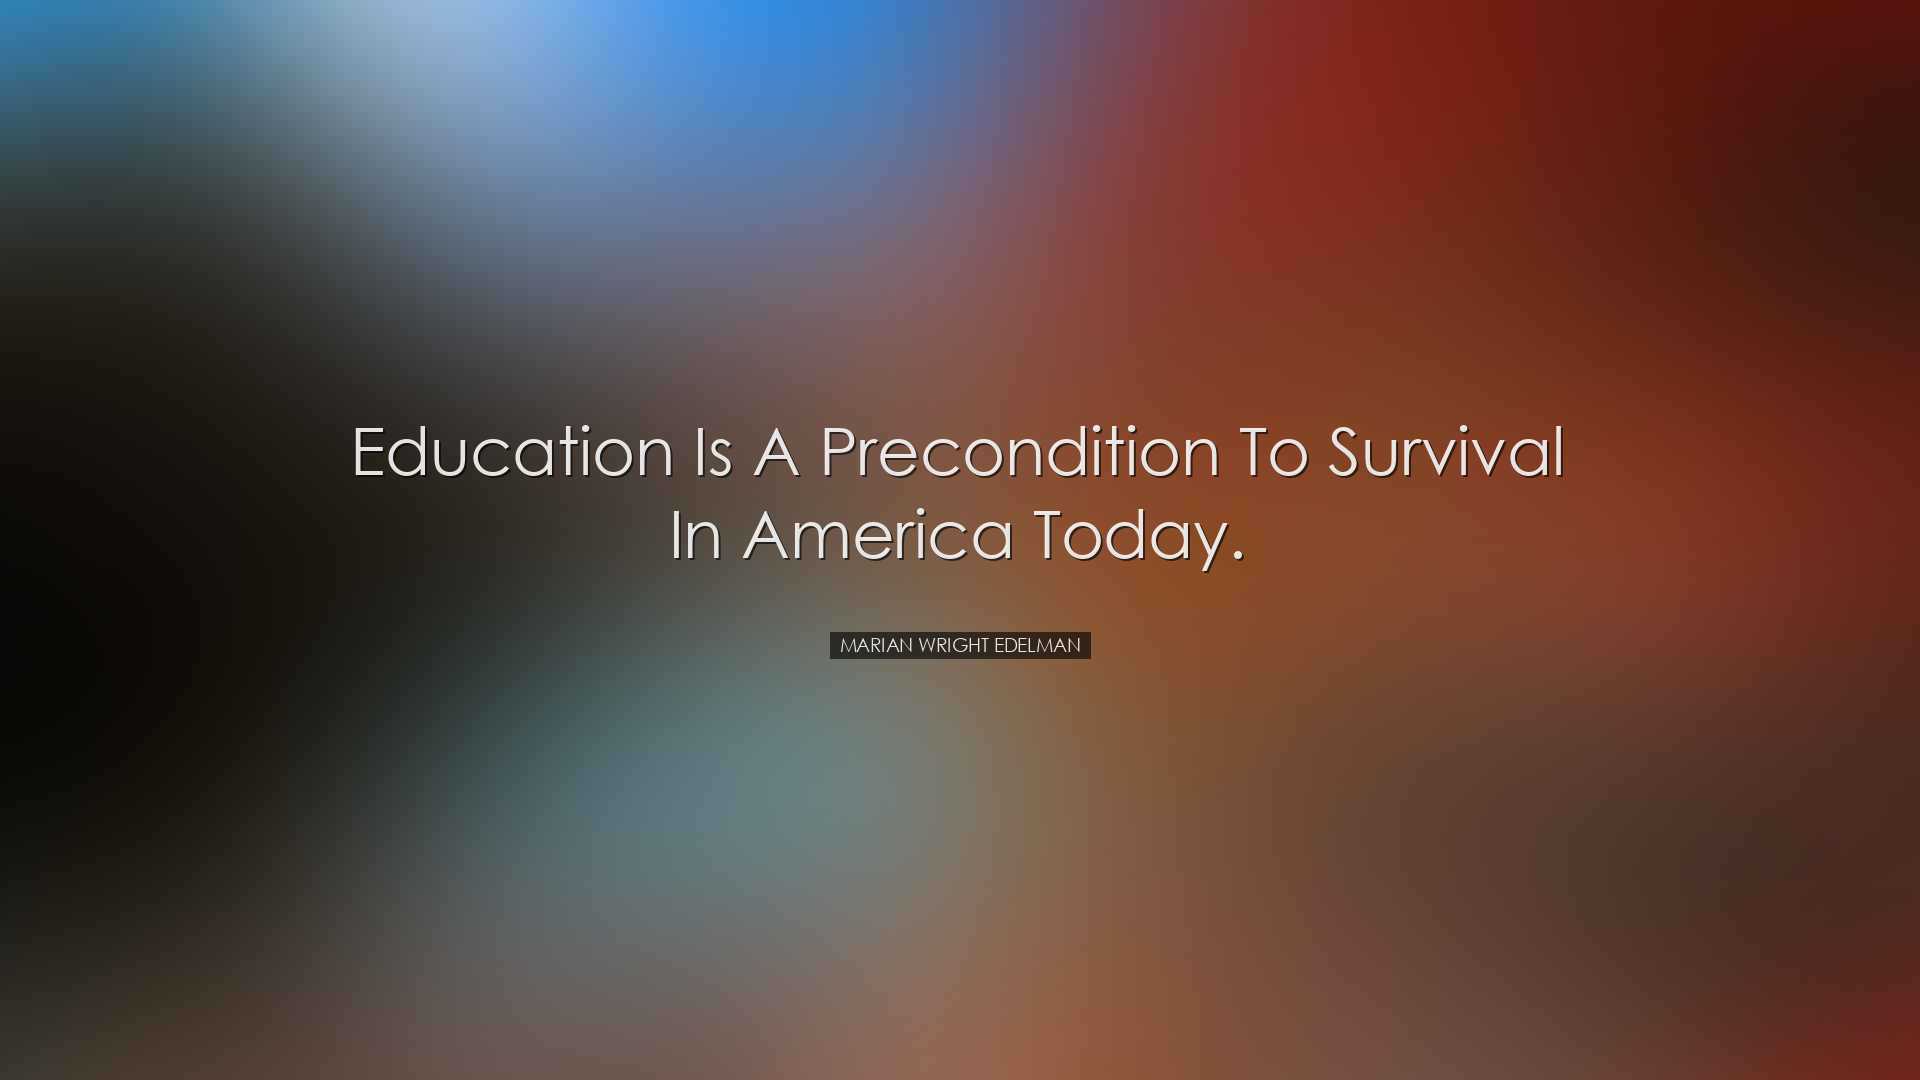 Education is a precondition to survival in America today. - Marian